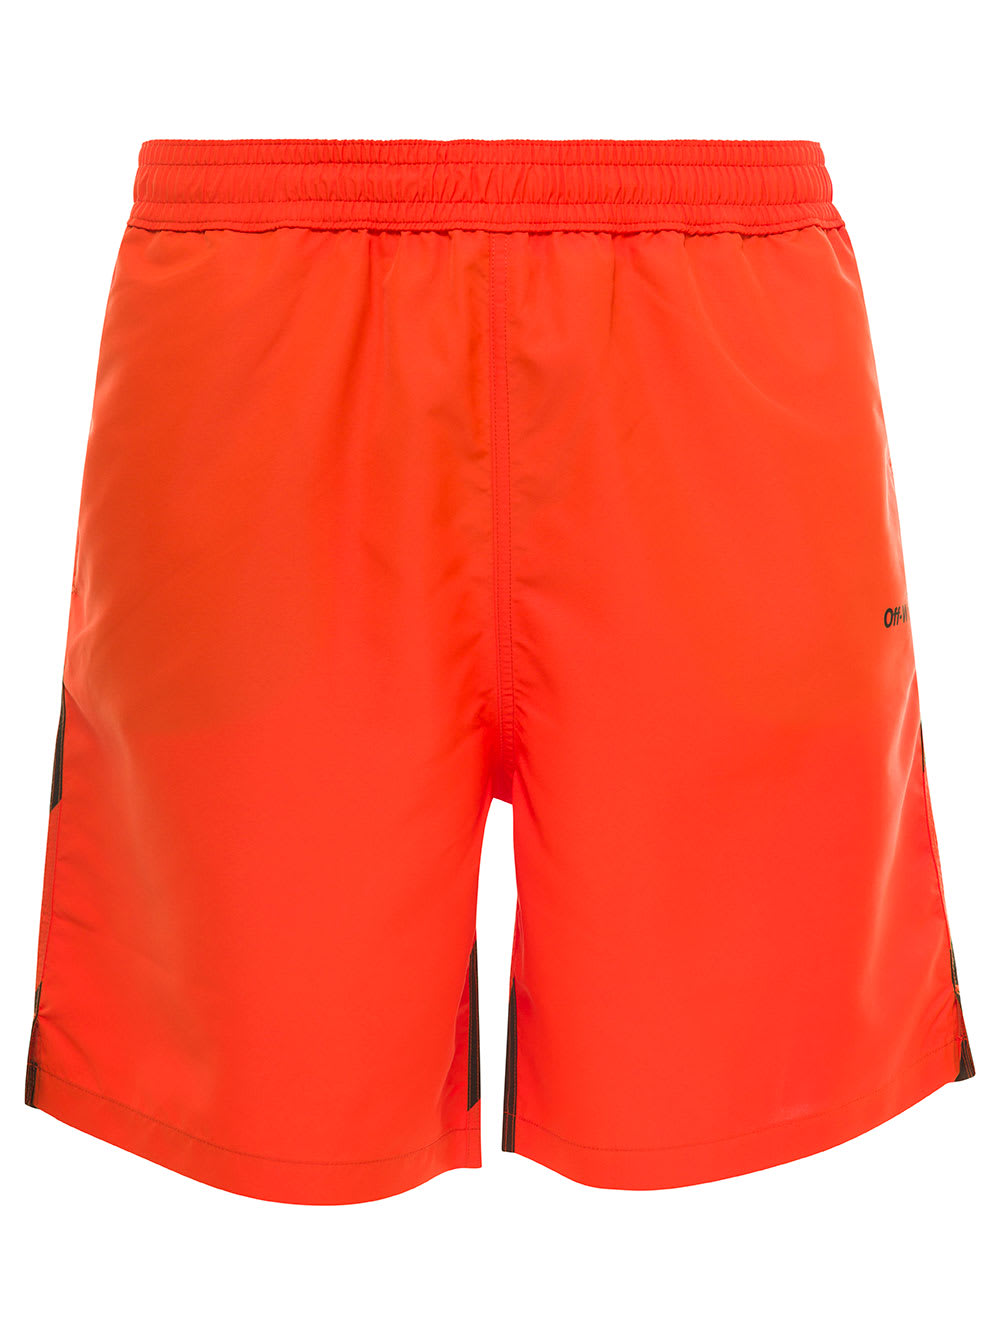 Orange Swim Trunks With Diag Print At The Back In Polyester Man